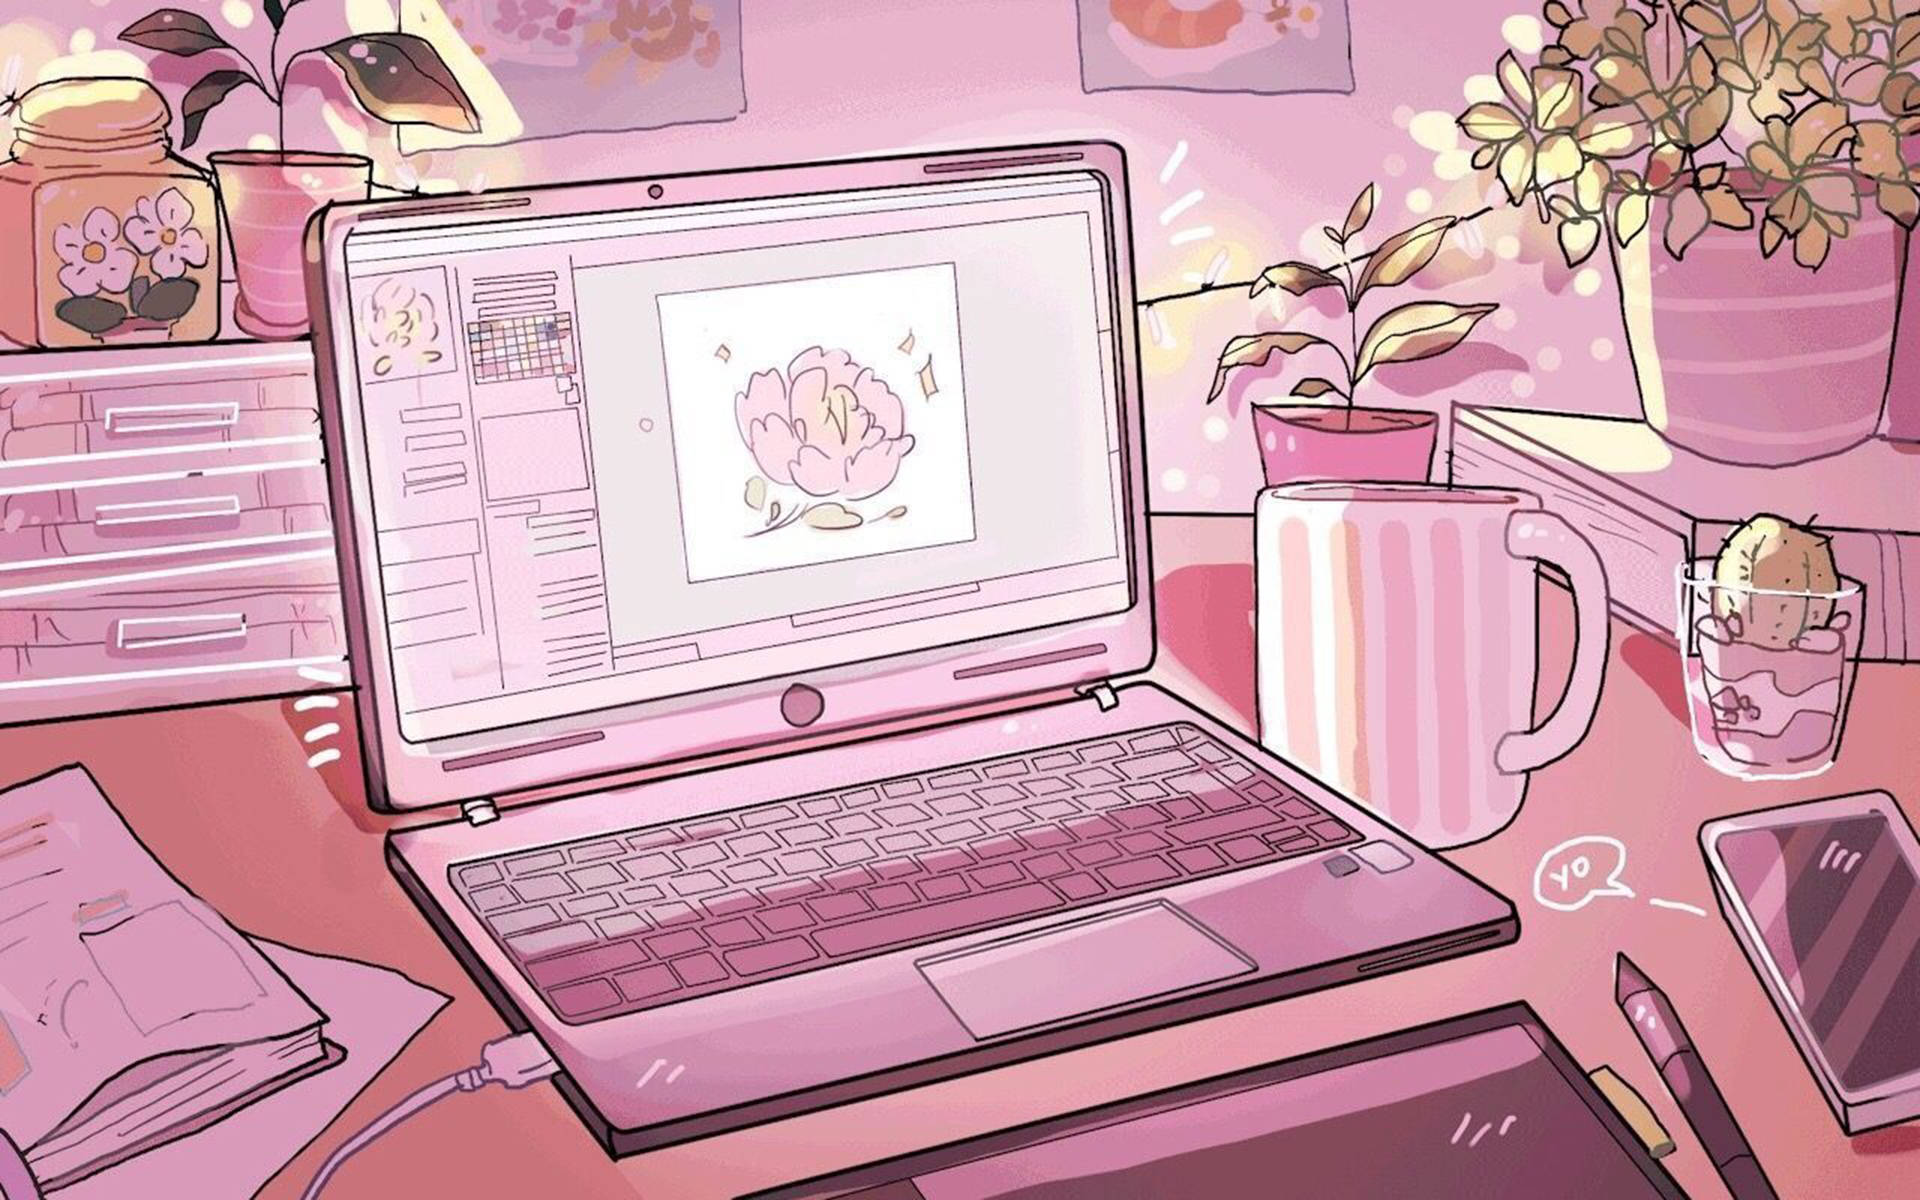 A pink laptop on a desk with a pink mug and a pink flower. - Study